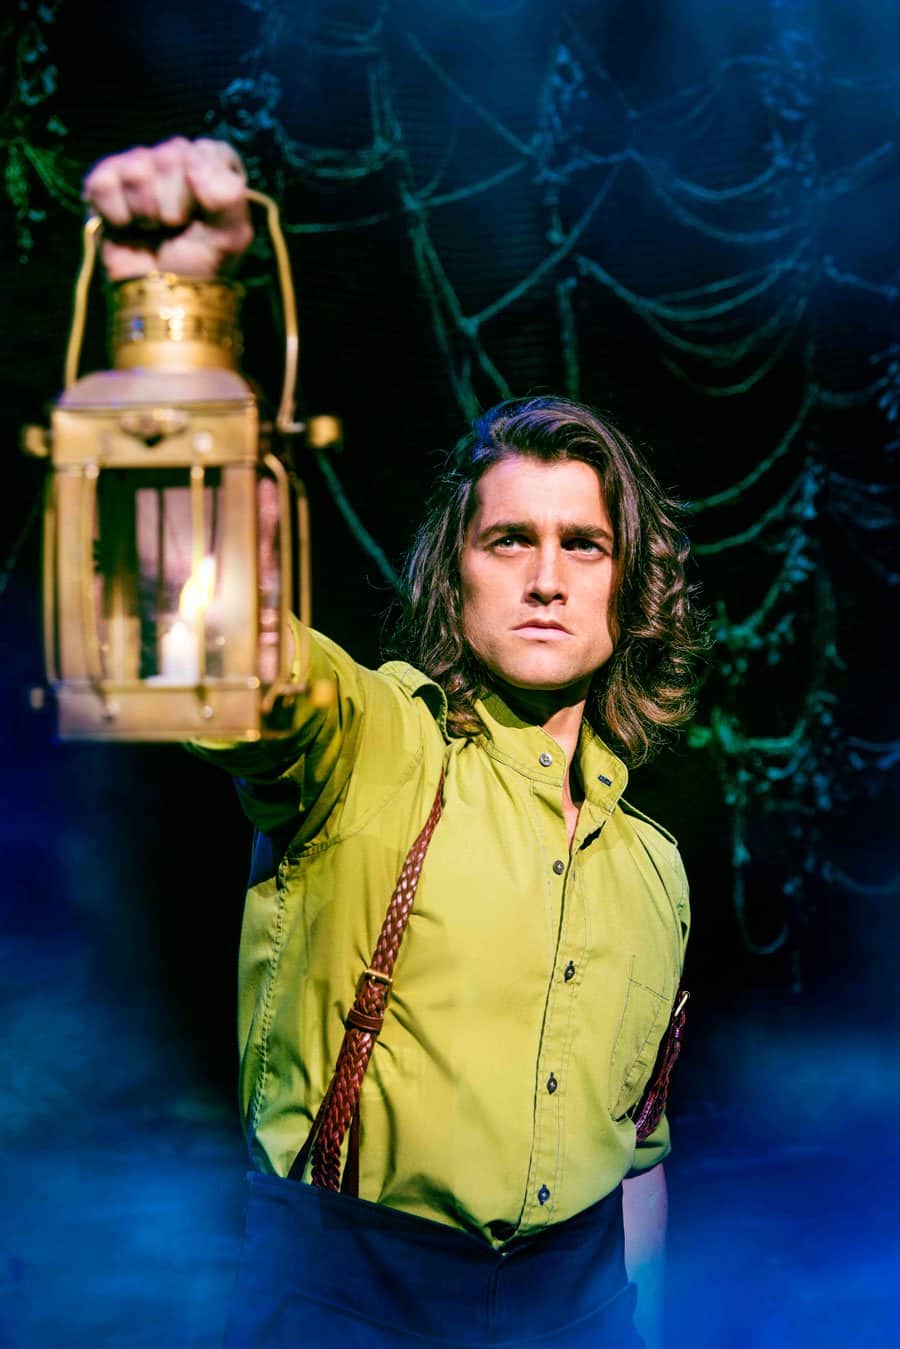 Book Wicked Tickets